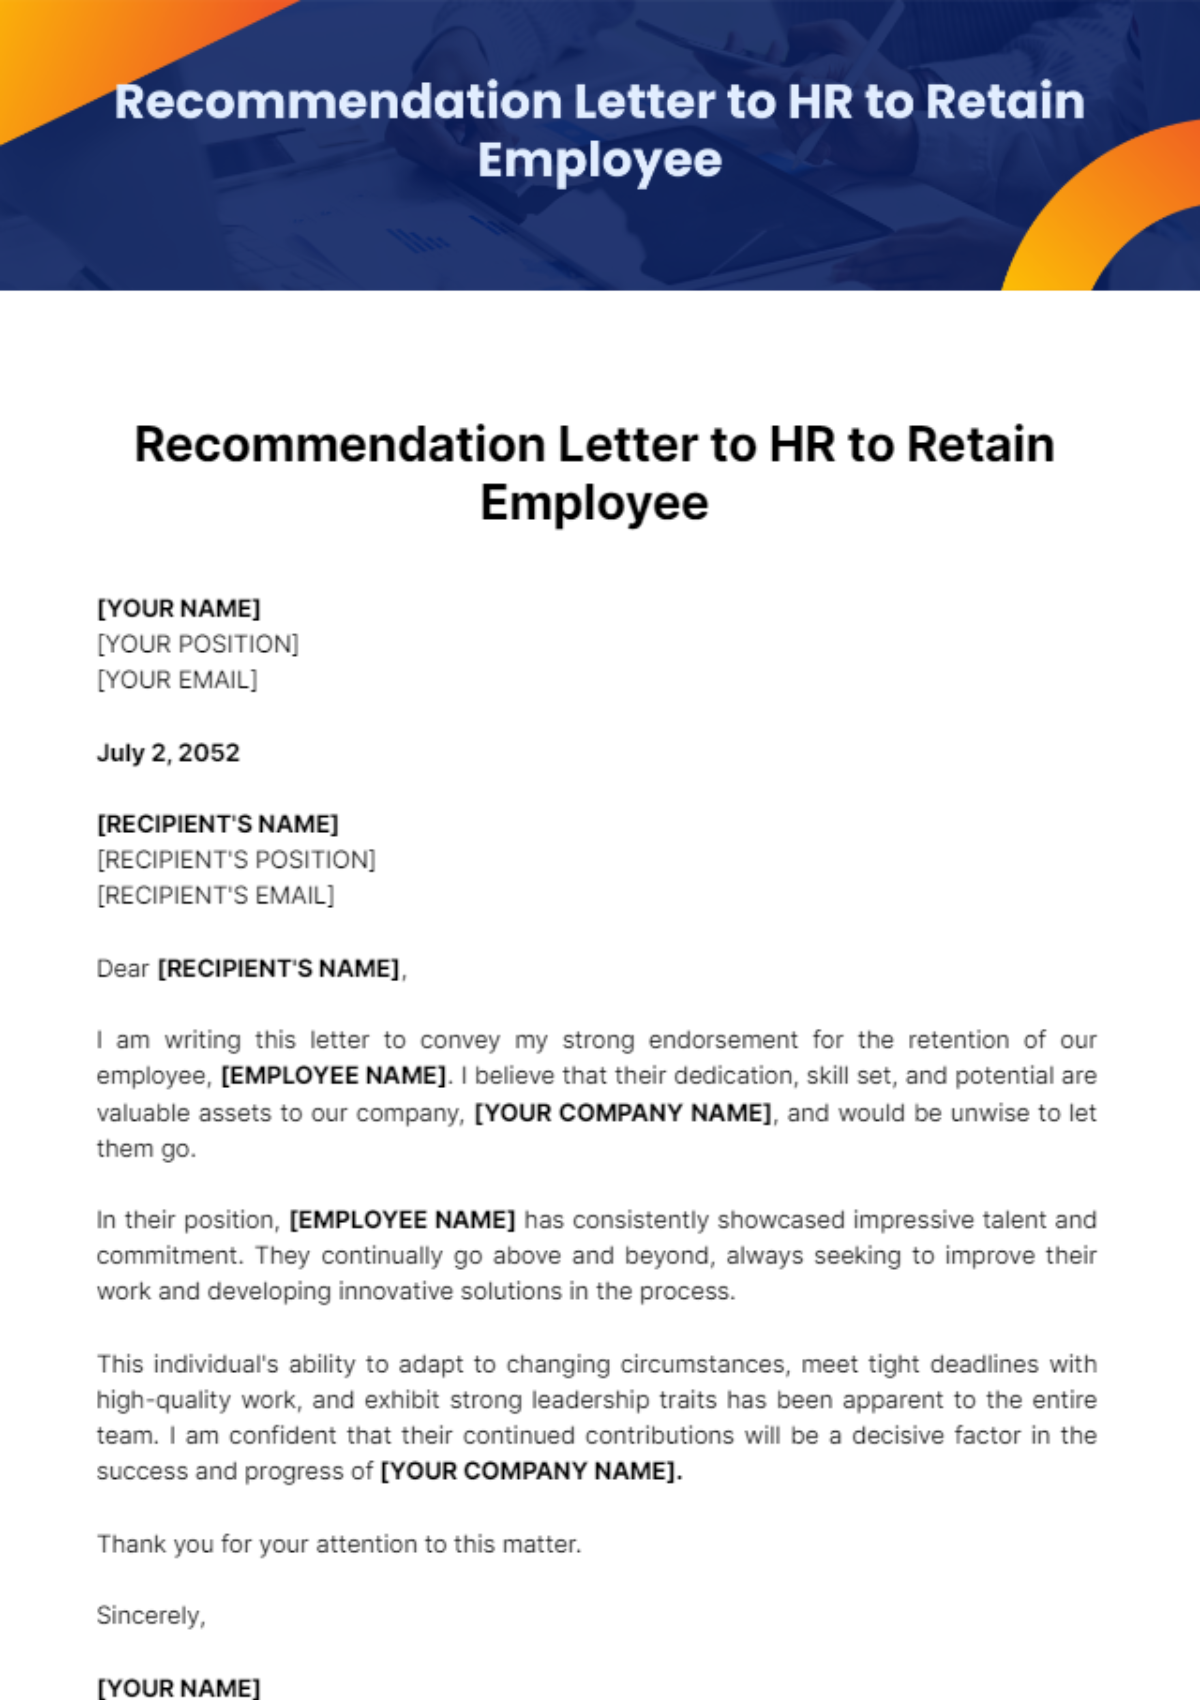 Free Recommendation Letter to HR to Retain Employee Template